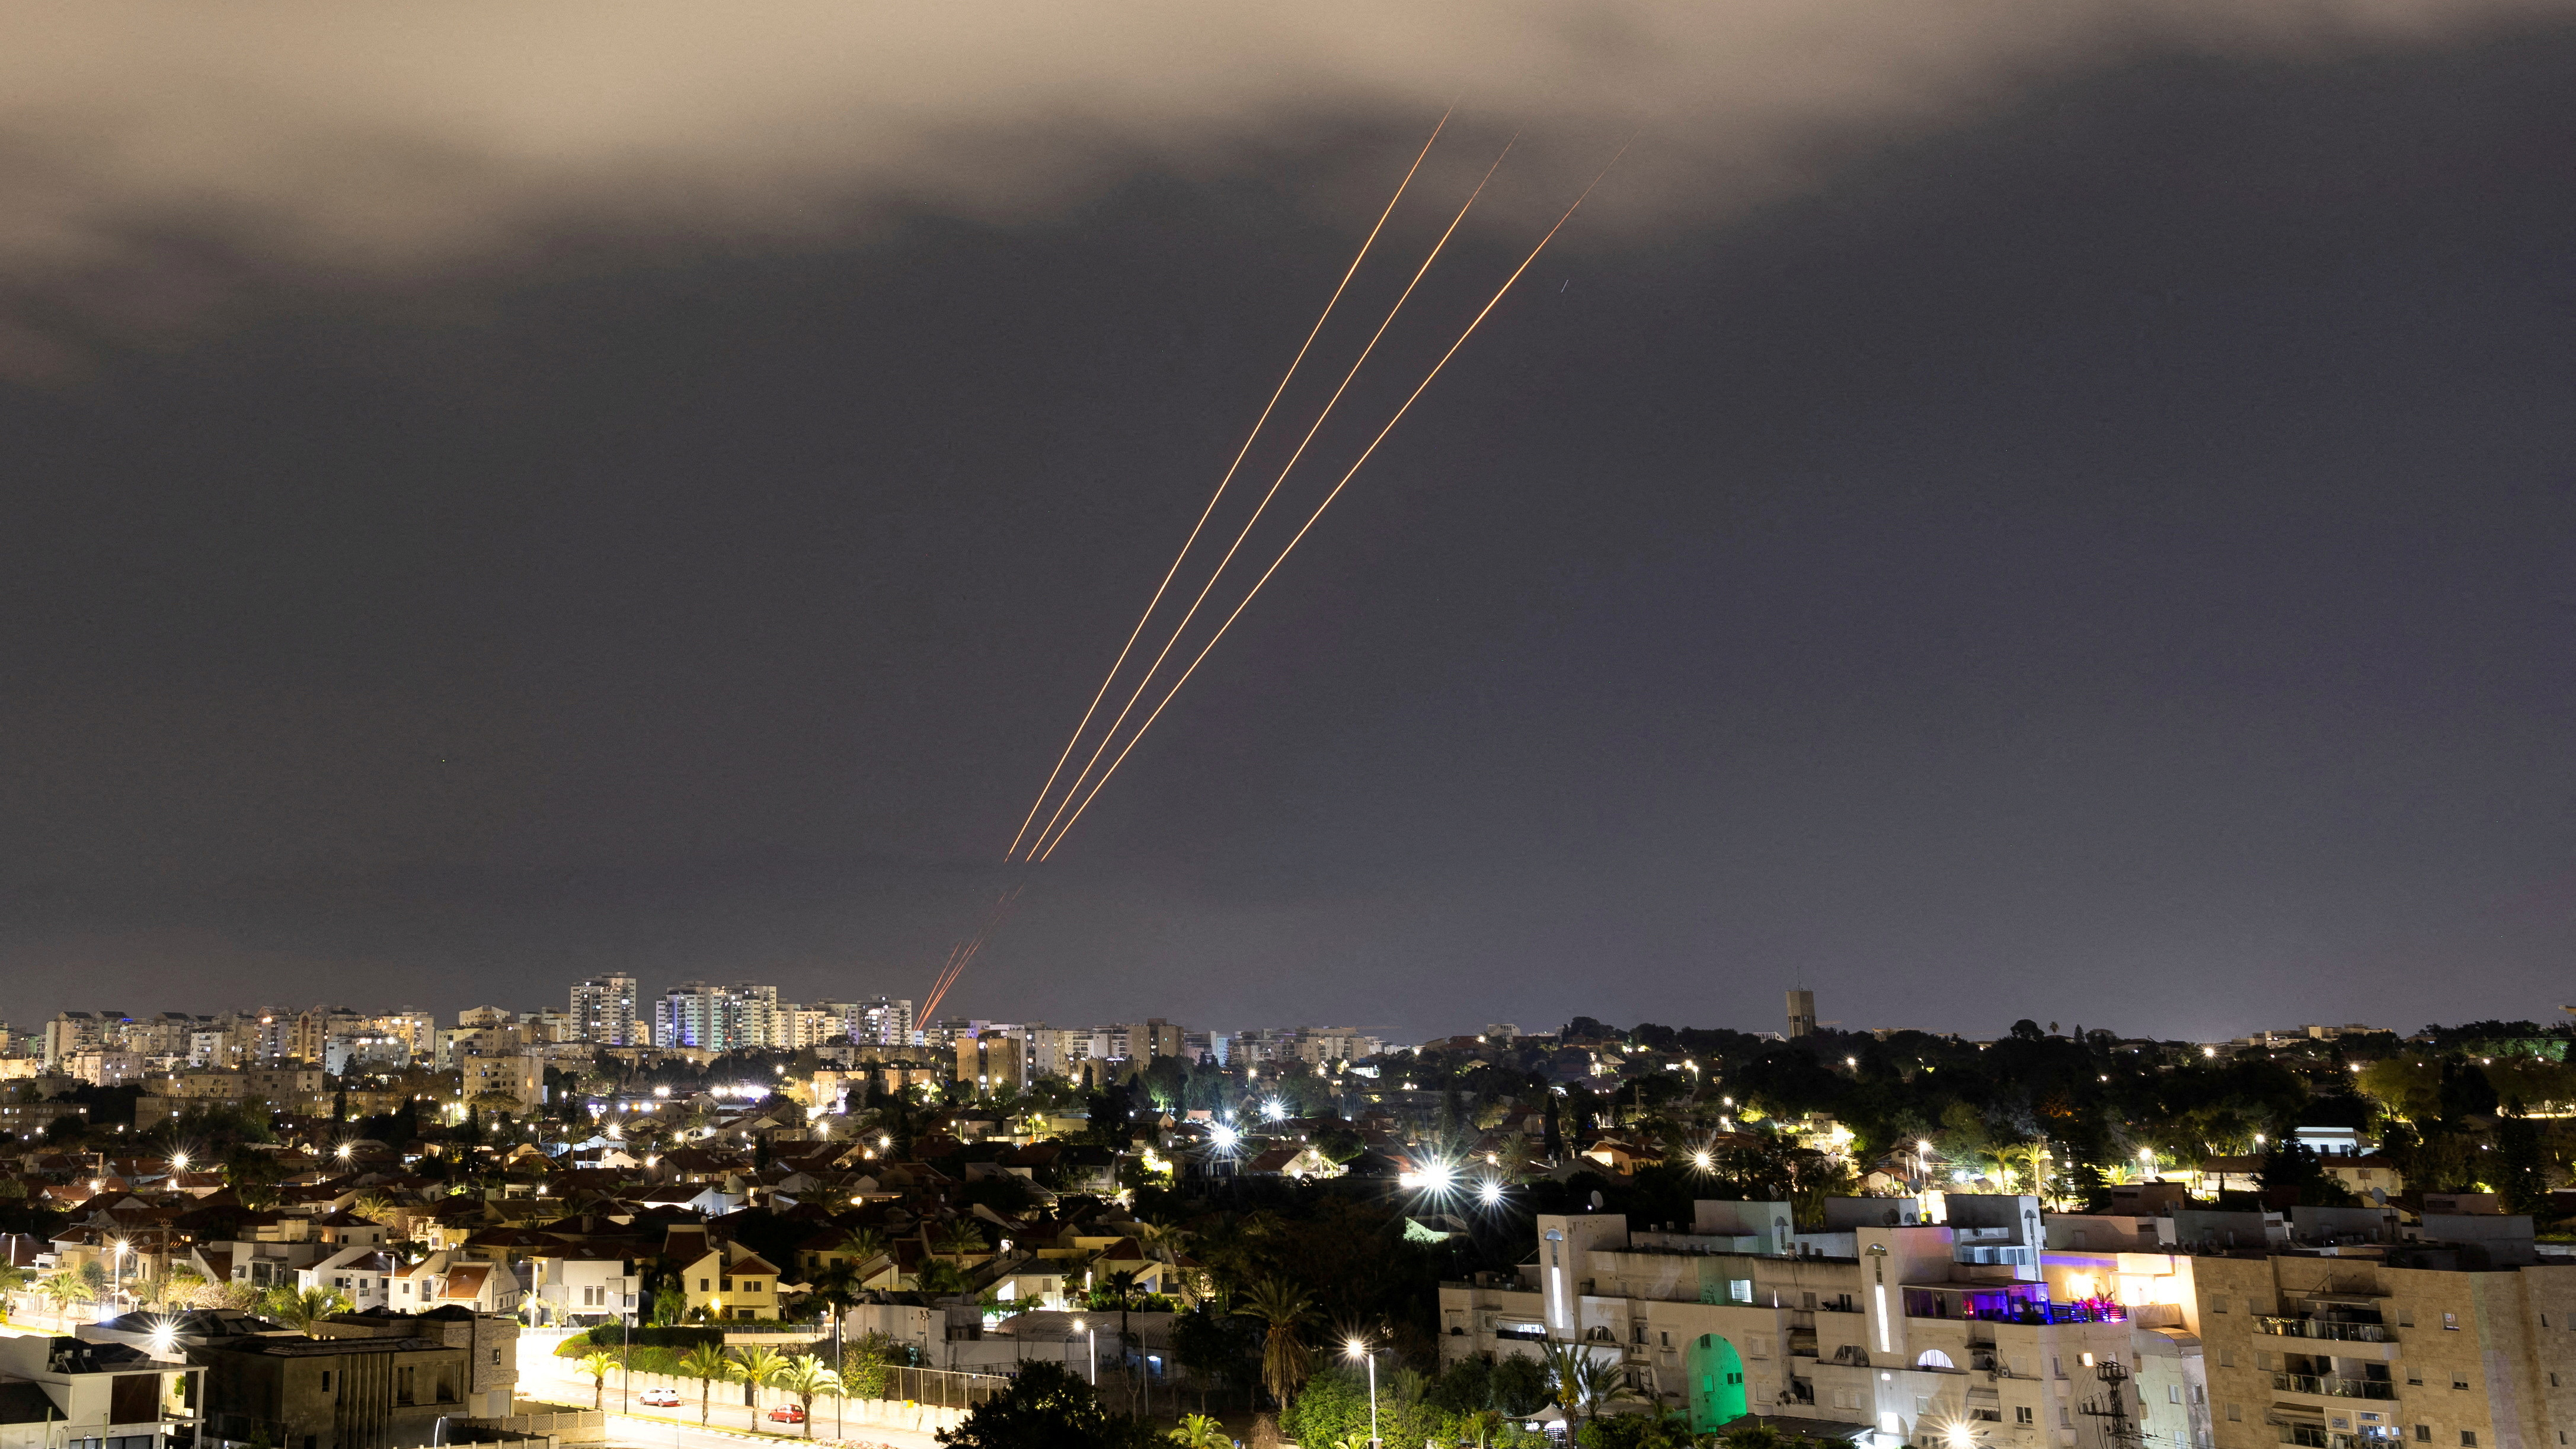 An anti-missile system operates after Iran launched drones and missiles toward Israel, as seen from Ashkelon, Israel, April 14.